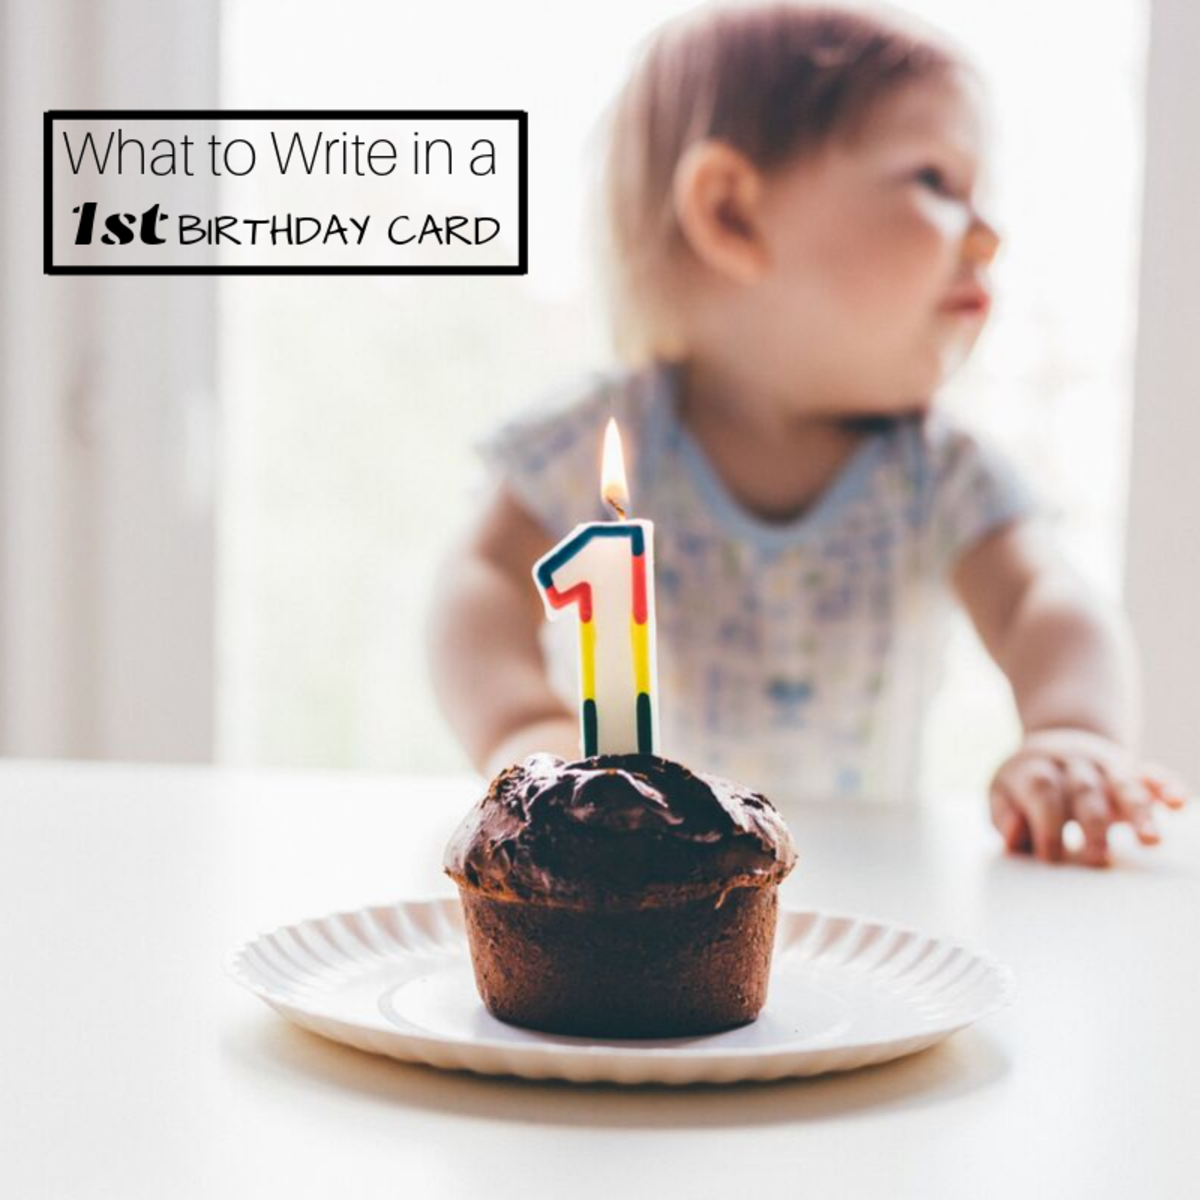 1st Birthday Wishes: What to Write in a One